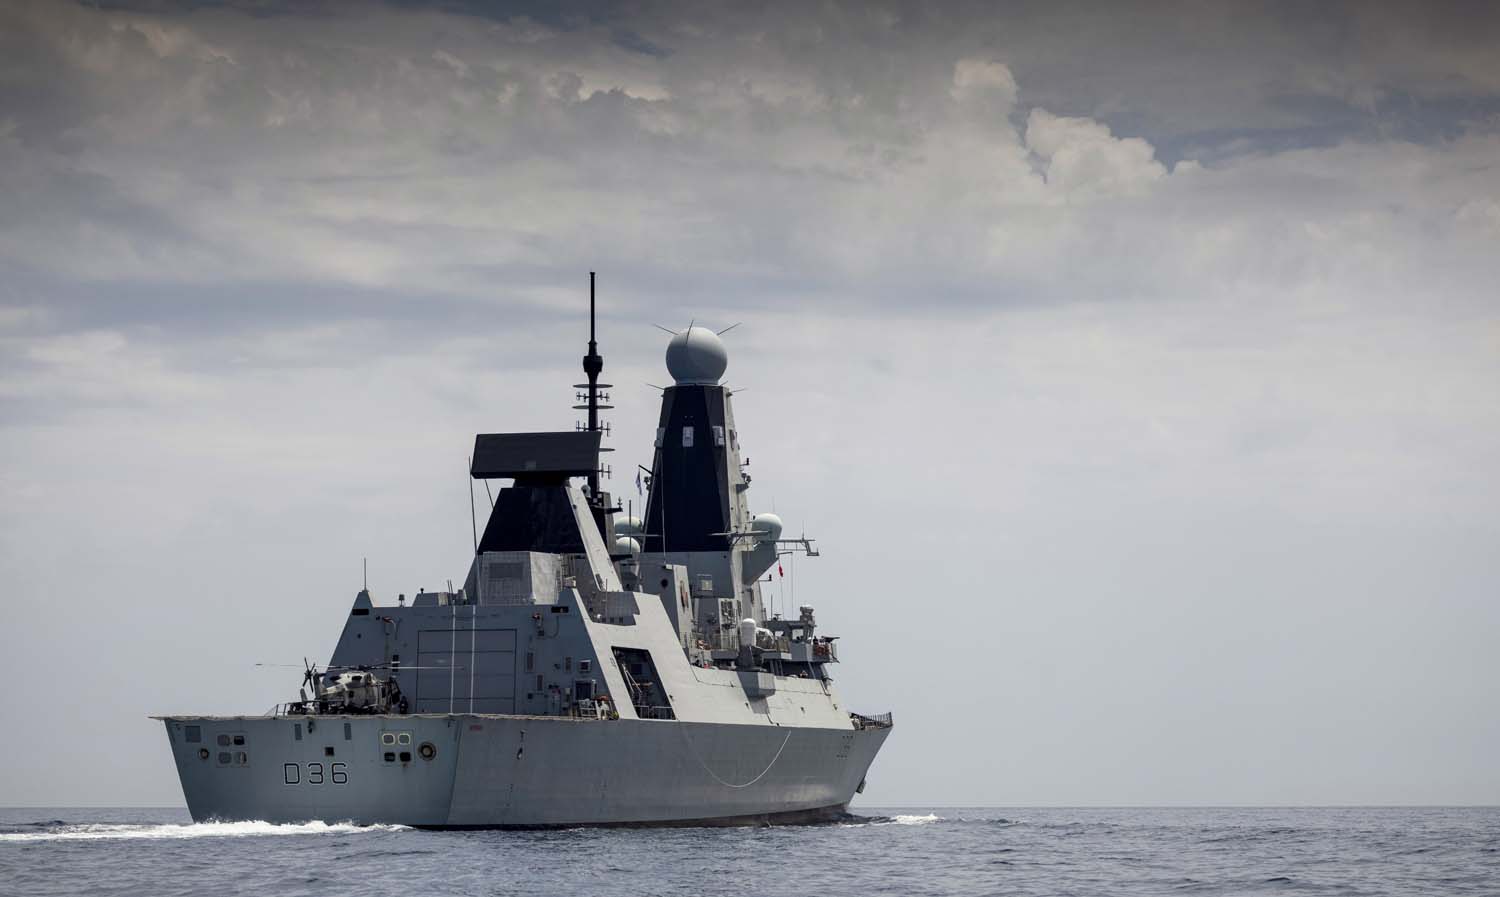 HMS Defender during their deployment with the Carrier Strike Group so far